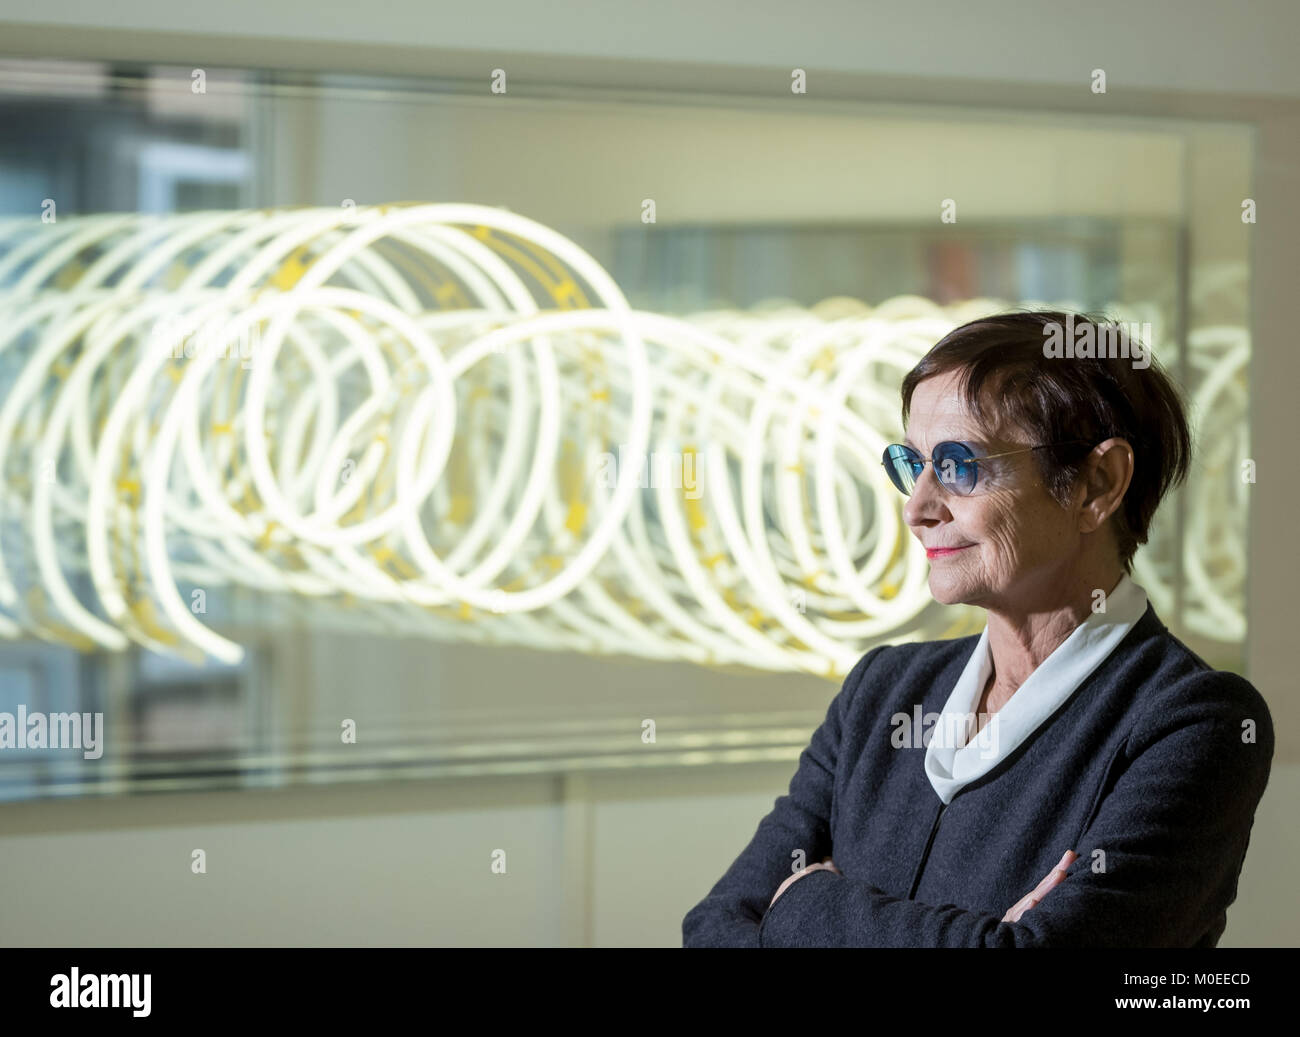 Celle, Germany. 21st Jan, 2018. Austrian artist Brigitte Kowanz standing in front of her work 'Iphone' before receiving the German Award on Light Art 2018 in the Art Museum in Celle, Germany, 21 January 2018. Kowanz is the third artist to receive the 10,000 euro prize. The German Award on Light Art is awarded every two years in the Celle Art Museum. The museum is displaying a selection of works by Brigitte Kowanz on the occasion of the prize' award. Among the works on display are some from the Austrian Pavilion from the Venice Biennale 2017. Credit: Peter Steffen/dpa/Alamy Live News Stock Photo